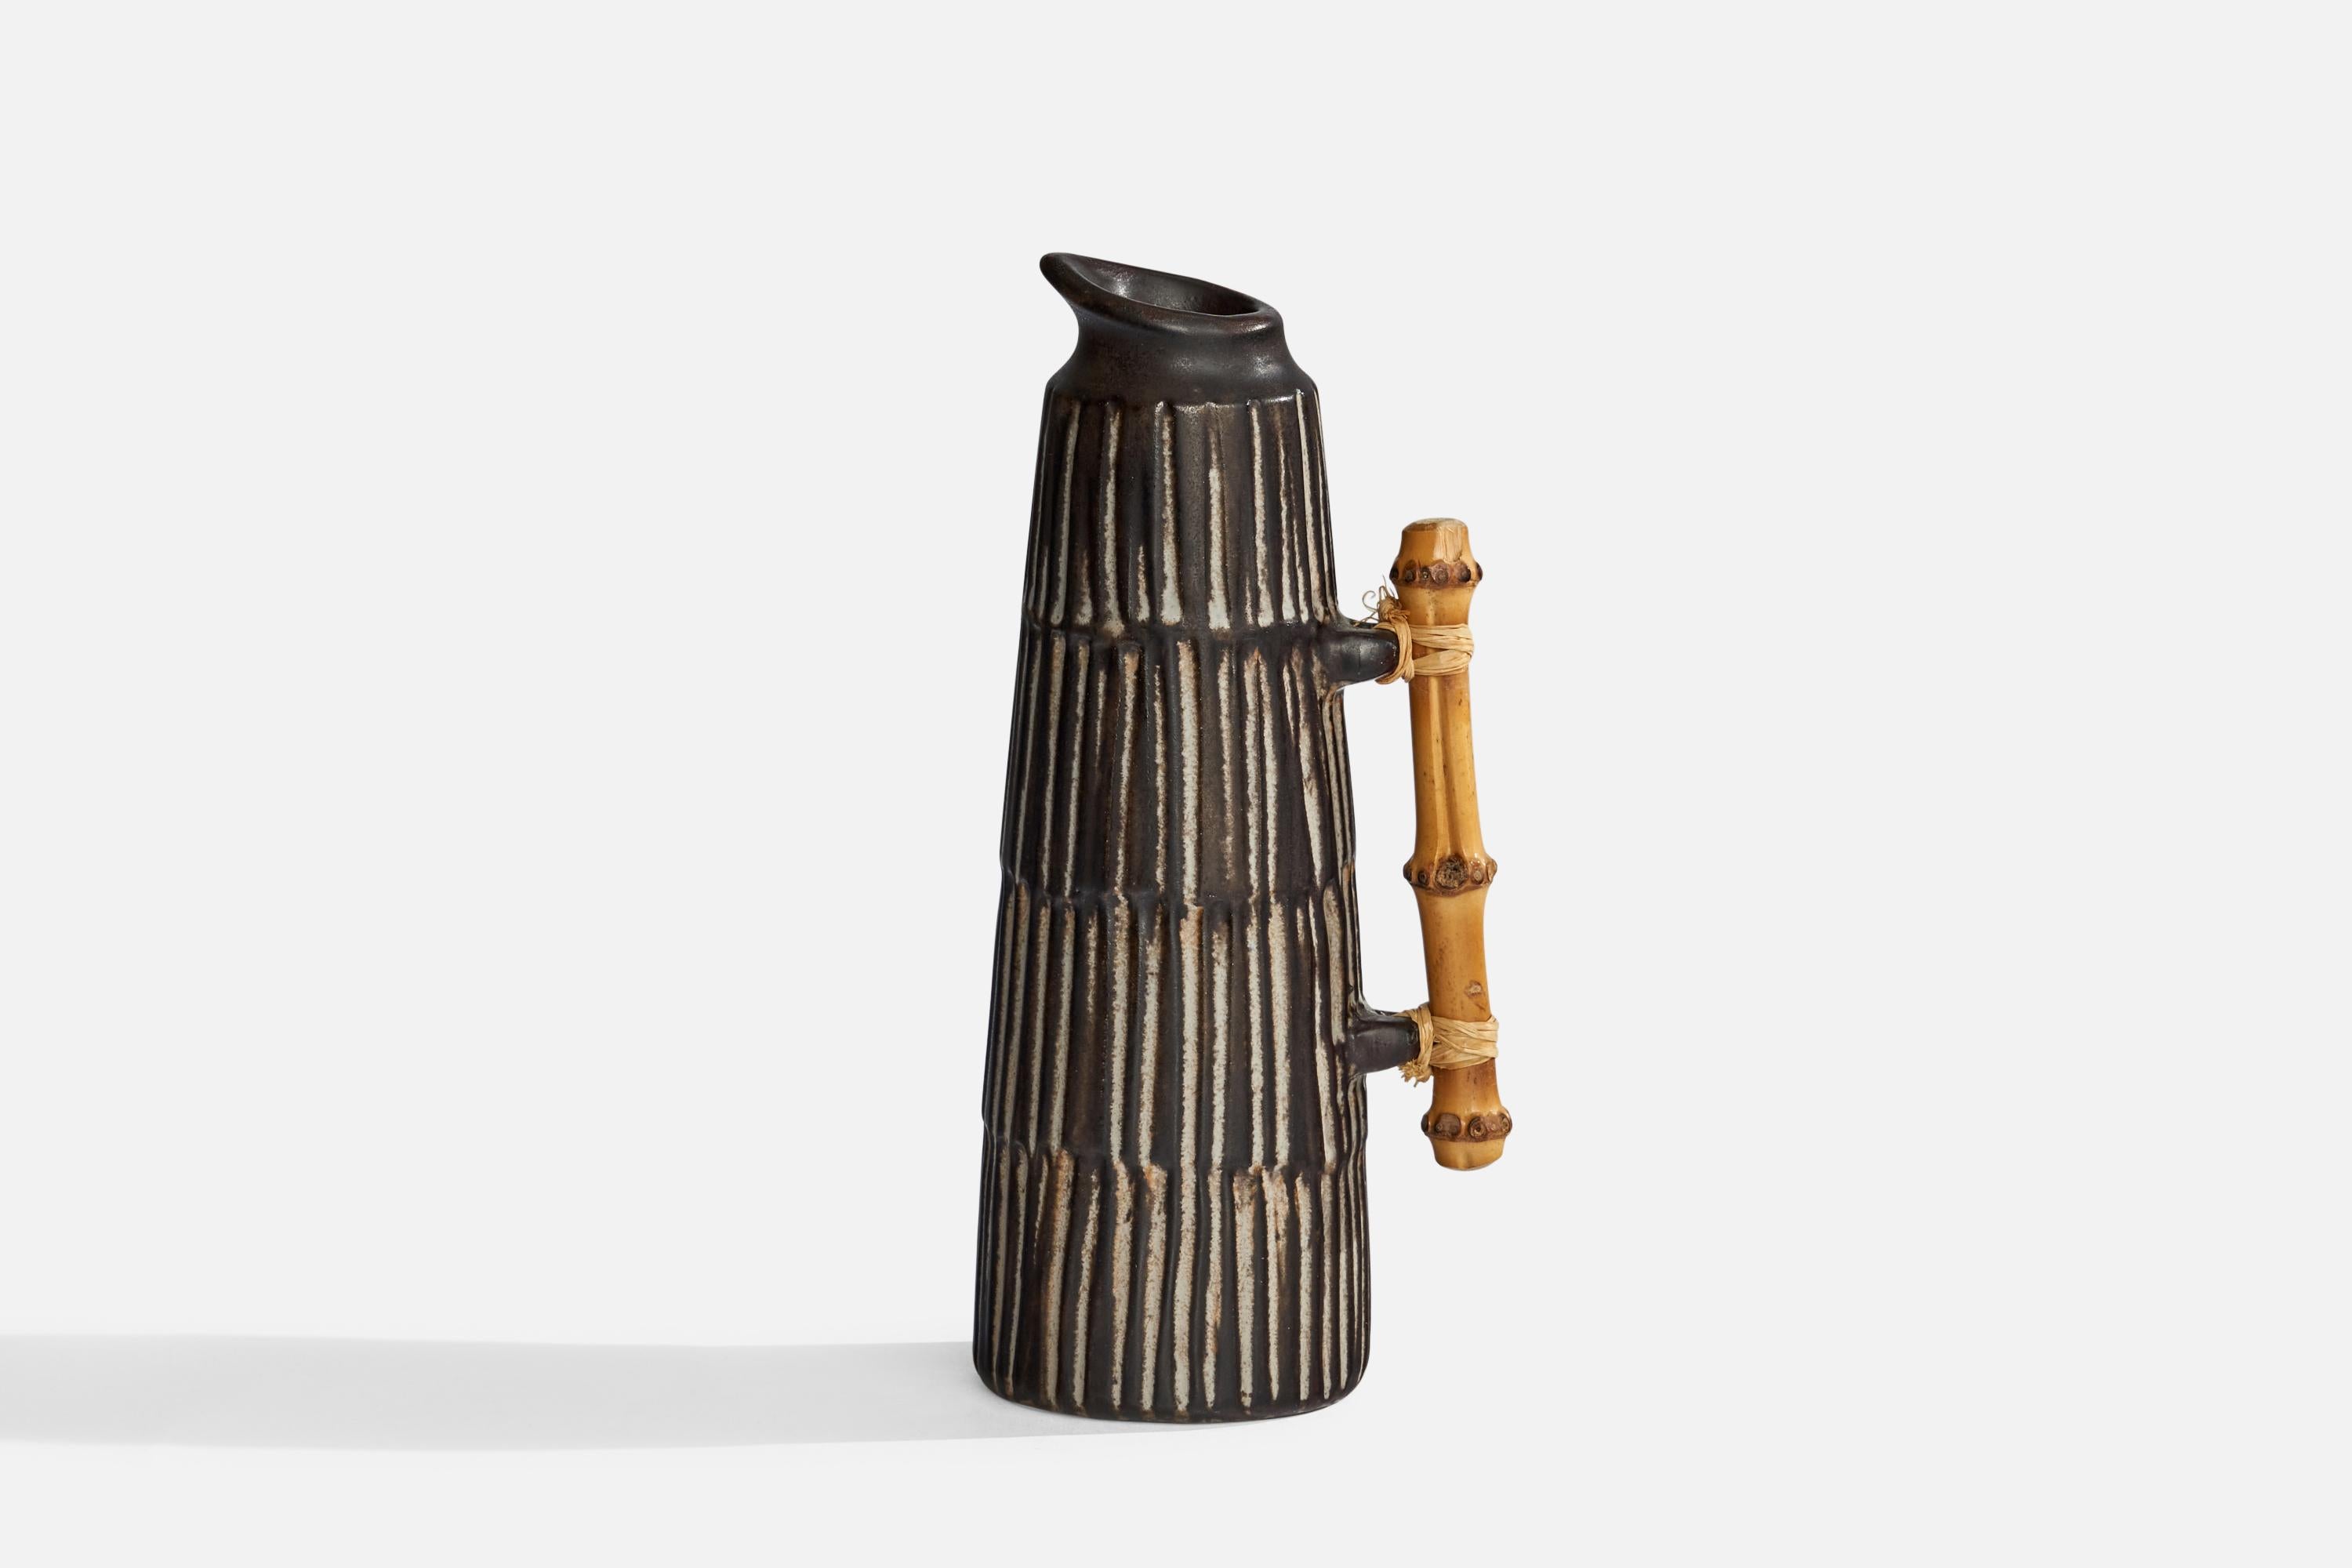 A small black grey-glazed ceramic and bamboo pitcher designed by Einer Hellerøe and produced by BR Keramik, Denmark, c. 1960s